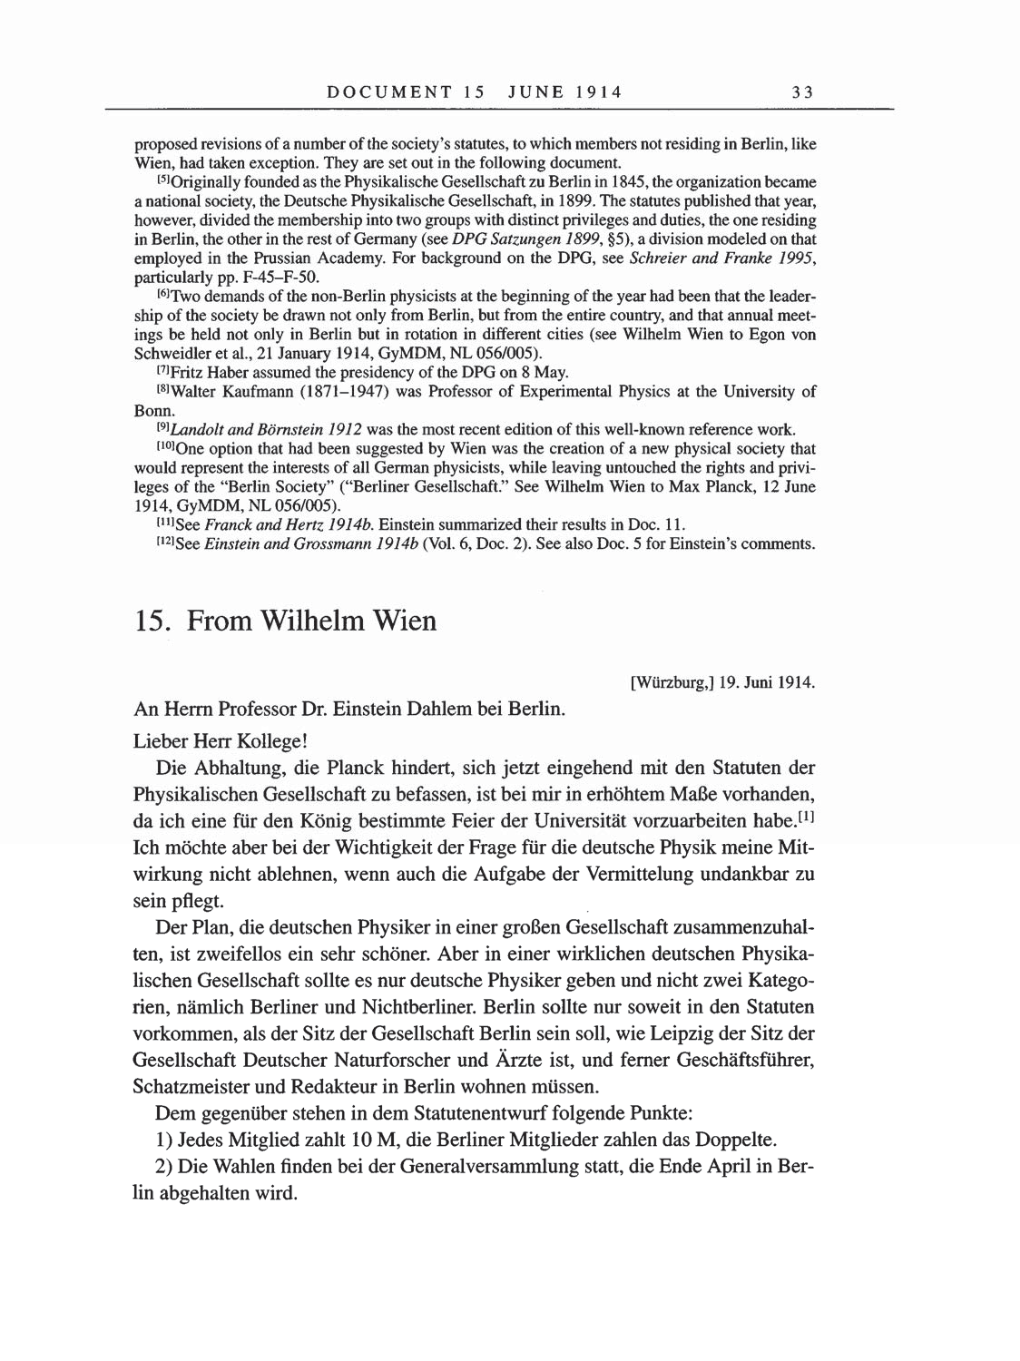 Volume 8, Part A: The Berlin Years: Correspondence 1914-1917 page 33